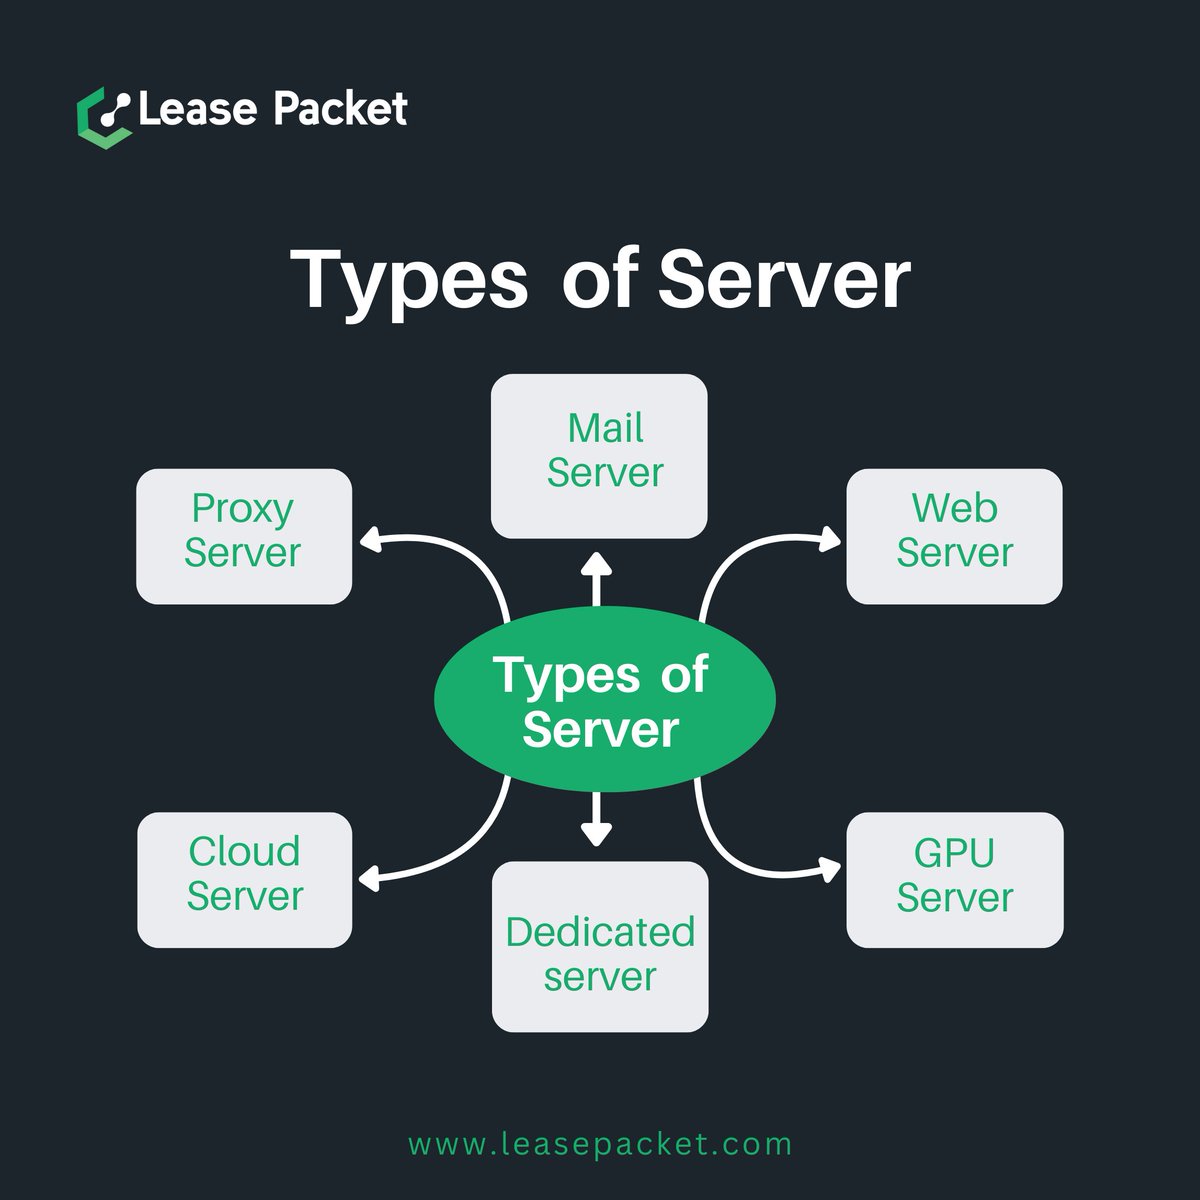 From dedicated to VPS, cloud, and beyond. At Lease Packet, we’ve got the server types to power every project. 
#server #dedicatedserver #cloudserver #servers #webserver #gpuserver #windowsserver #proxyserver #emailserver #serversupport #serversolution #serverprovide #leasepacket